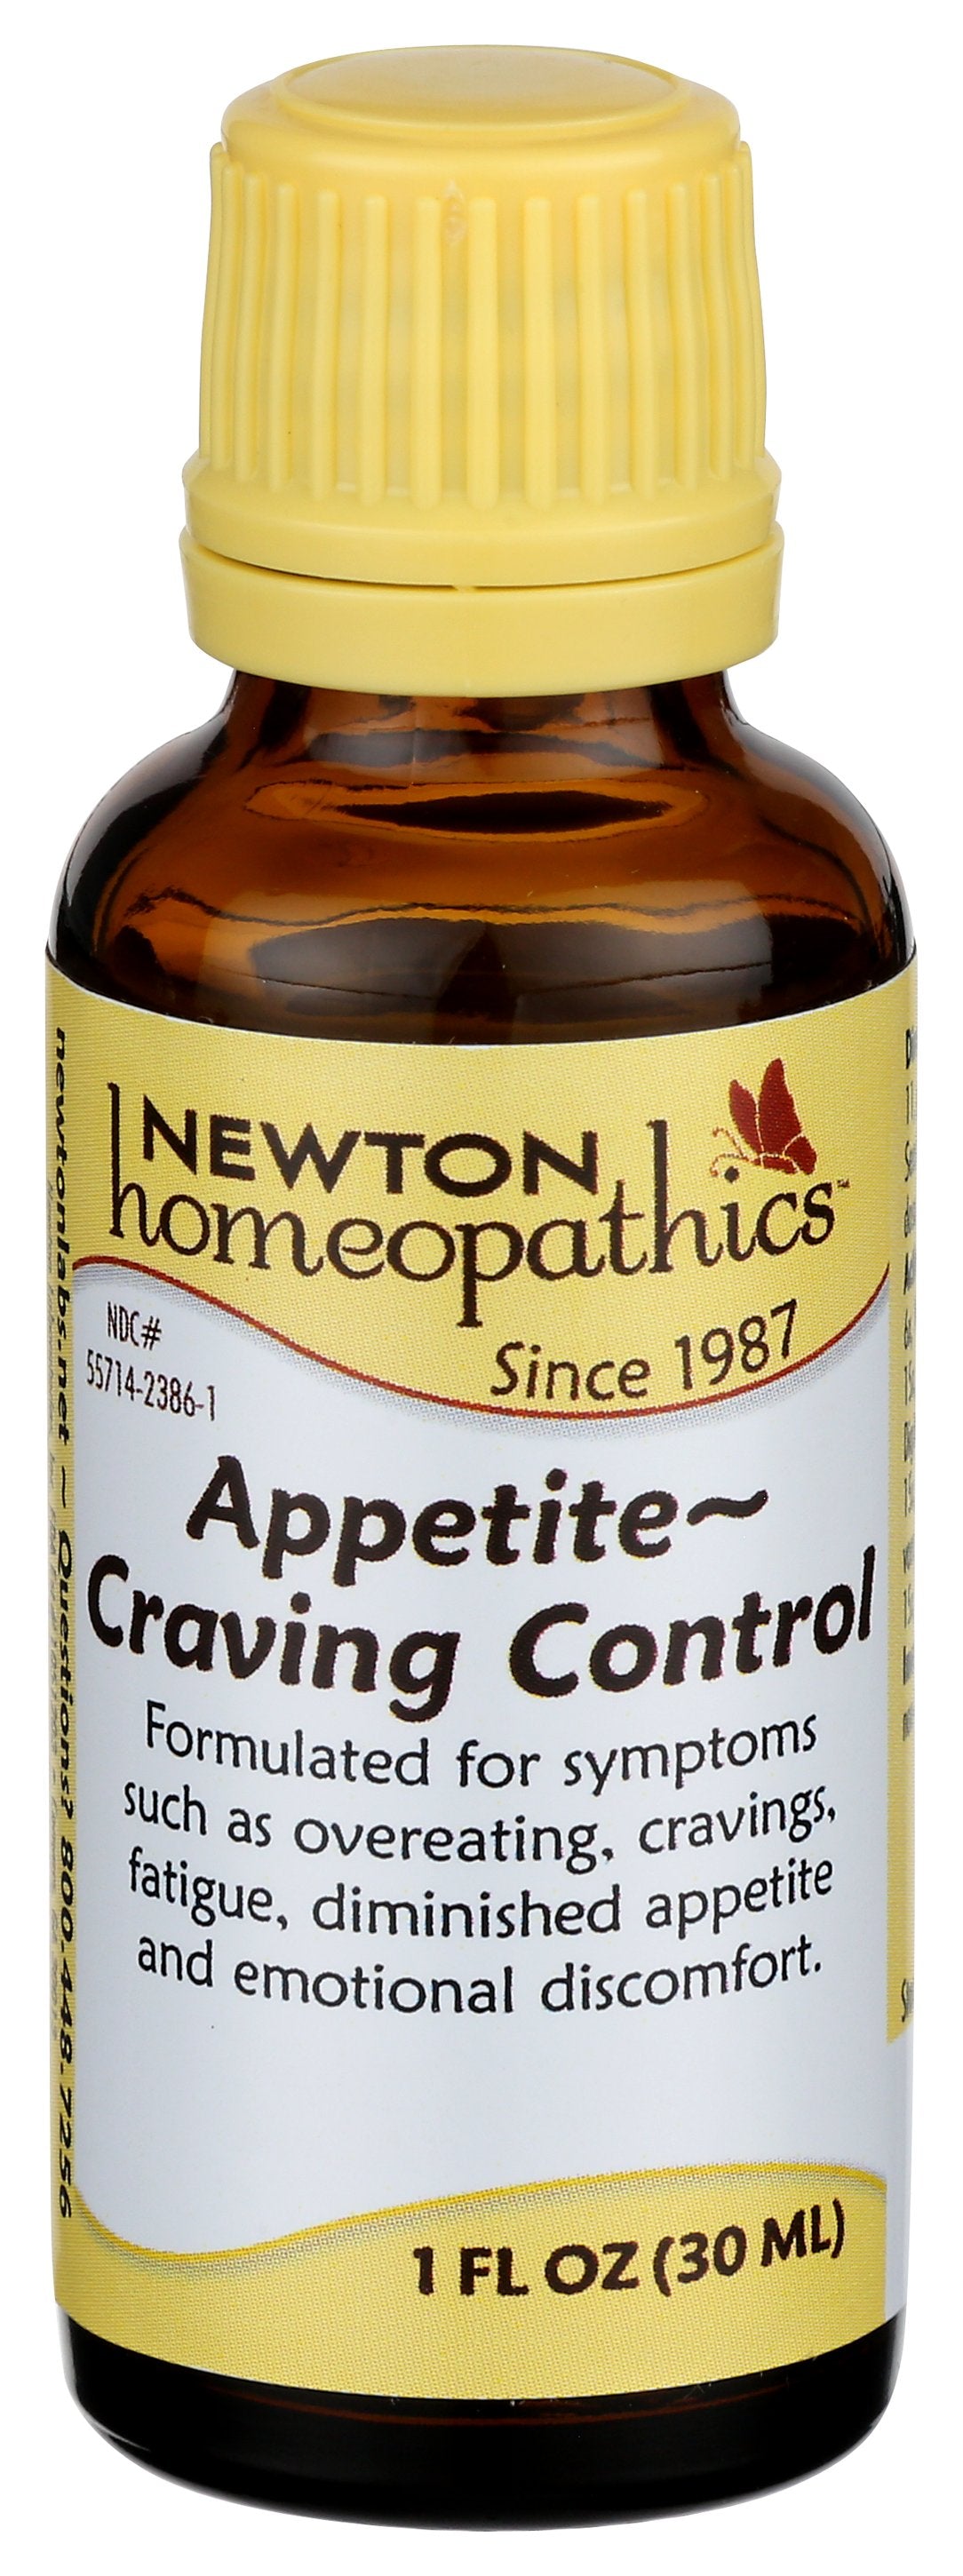 NEWTON HOMEOPATHICS APPETITE CRAVING CONTROL